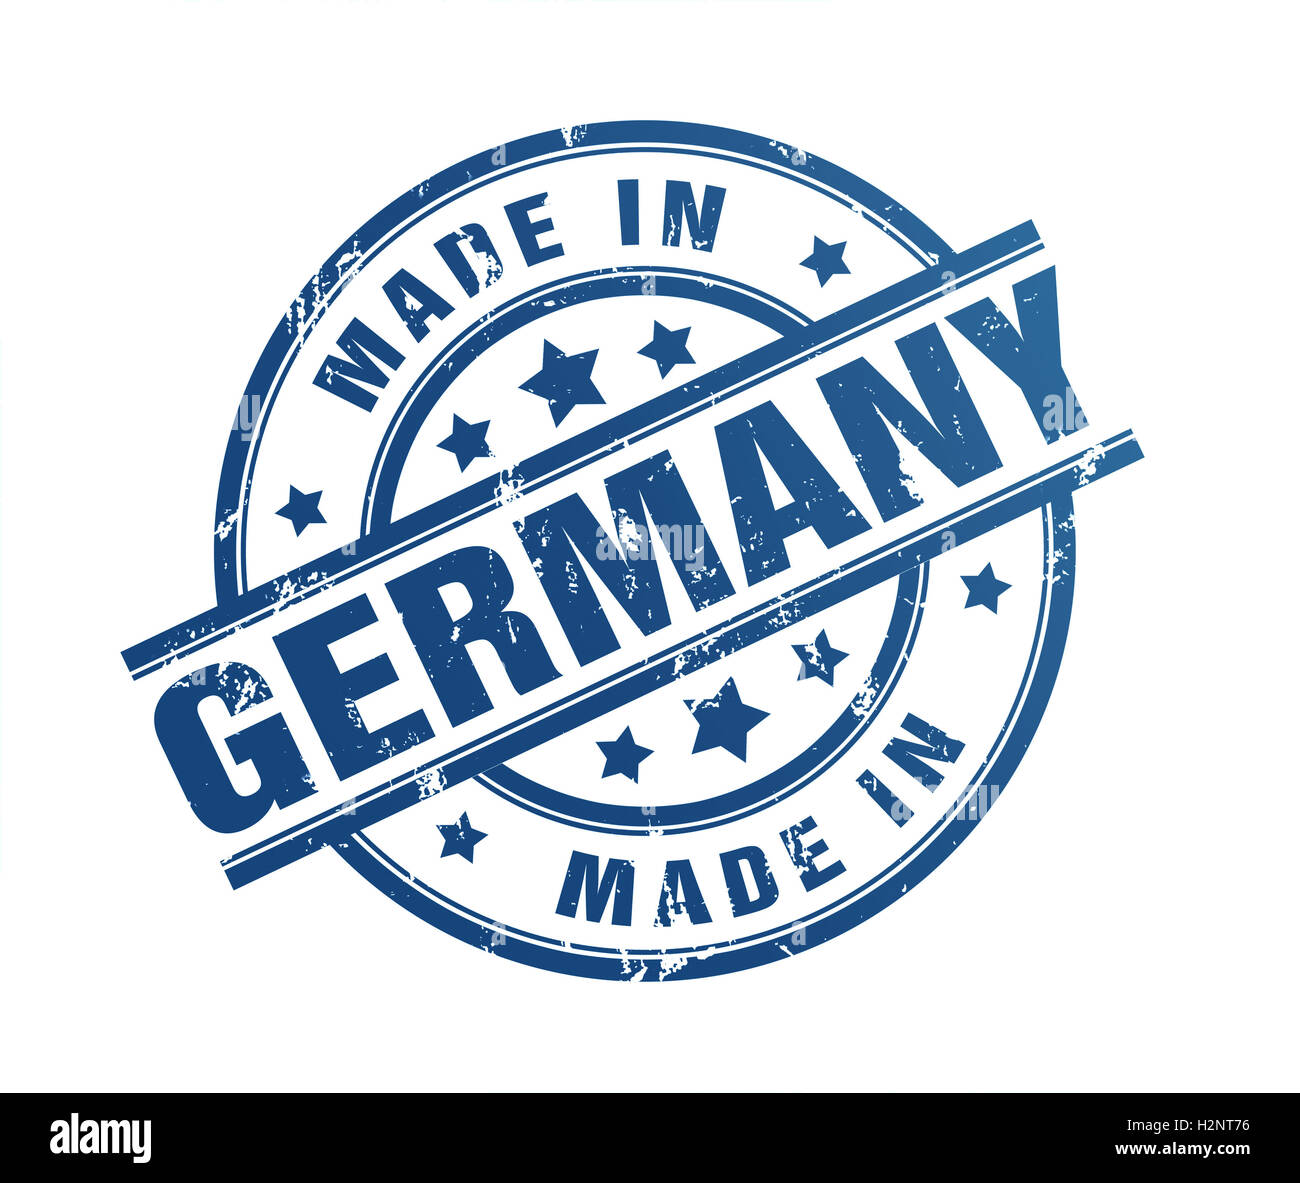 made in germany rubber stamp illustration Stock Photo